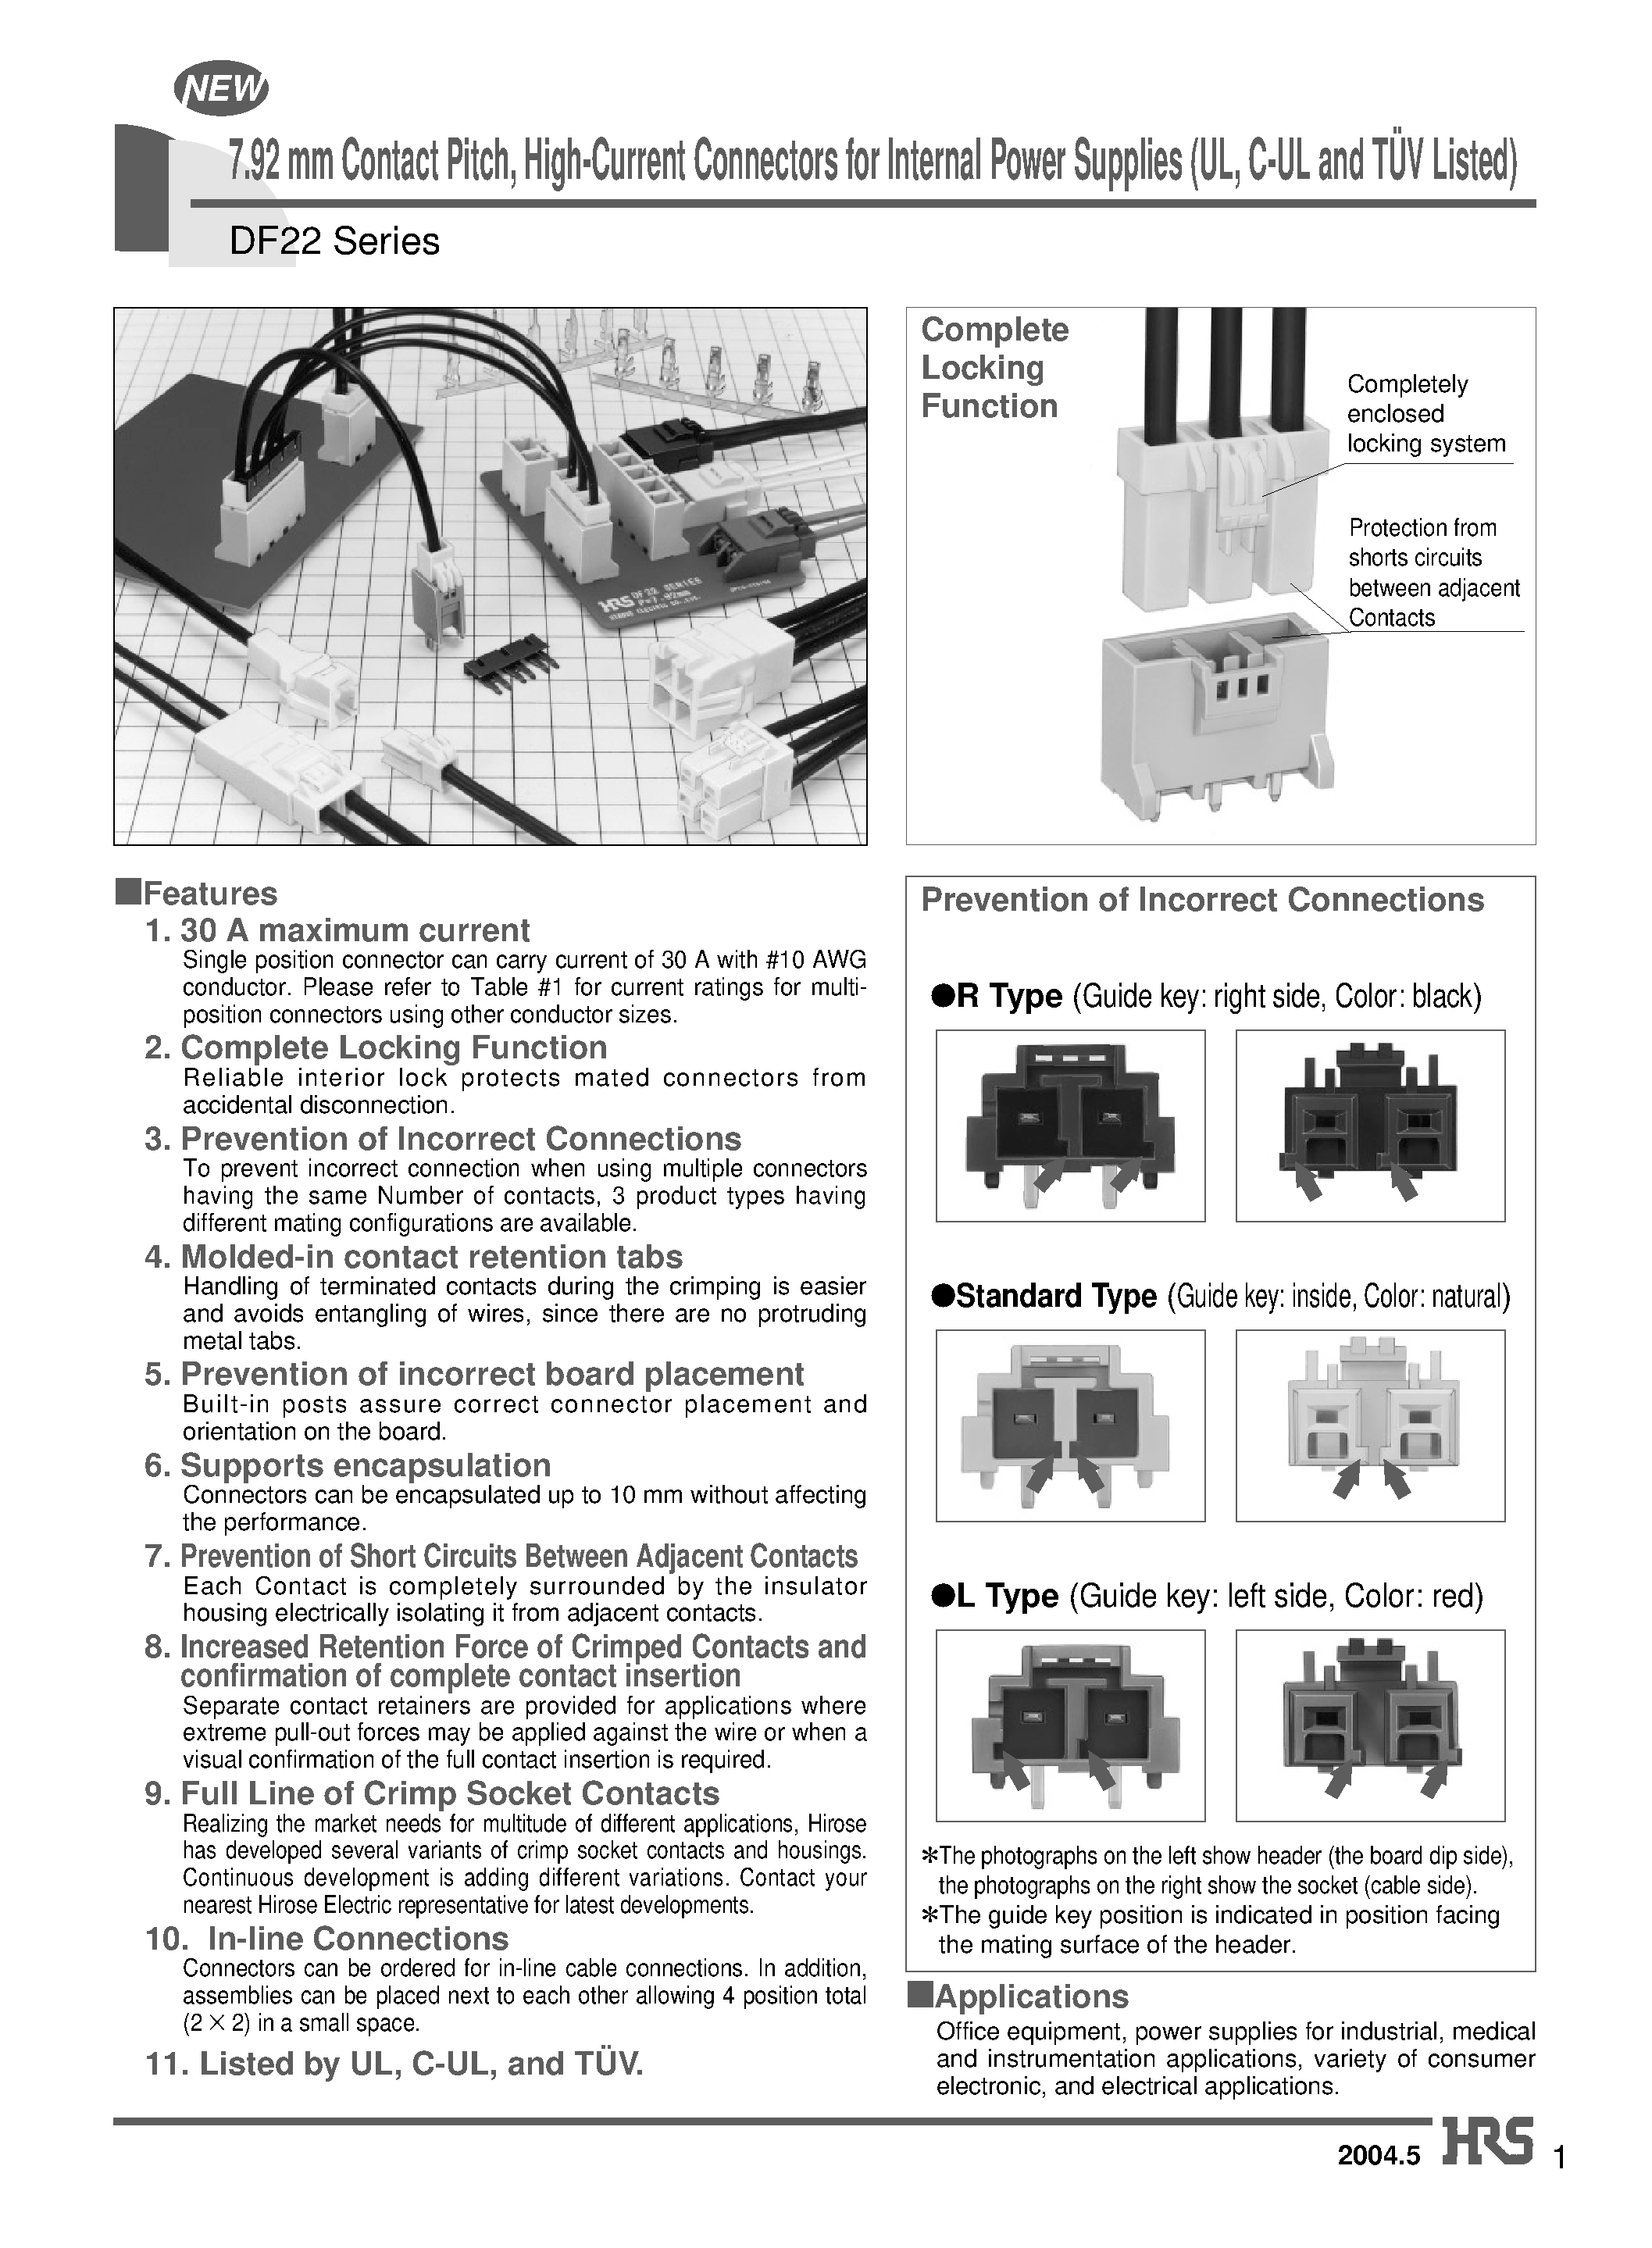 Datasheet DF22A-1P-7.92C - 7.92 mm Contact Pitch/ High-Current Connectors for Internal Power Supplies (UL/ C-UL and TUV Listed) page 1